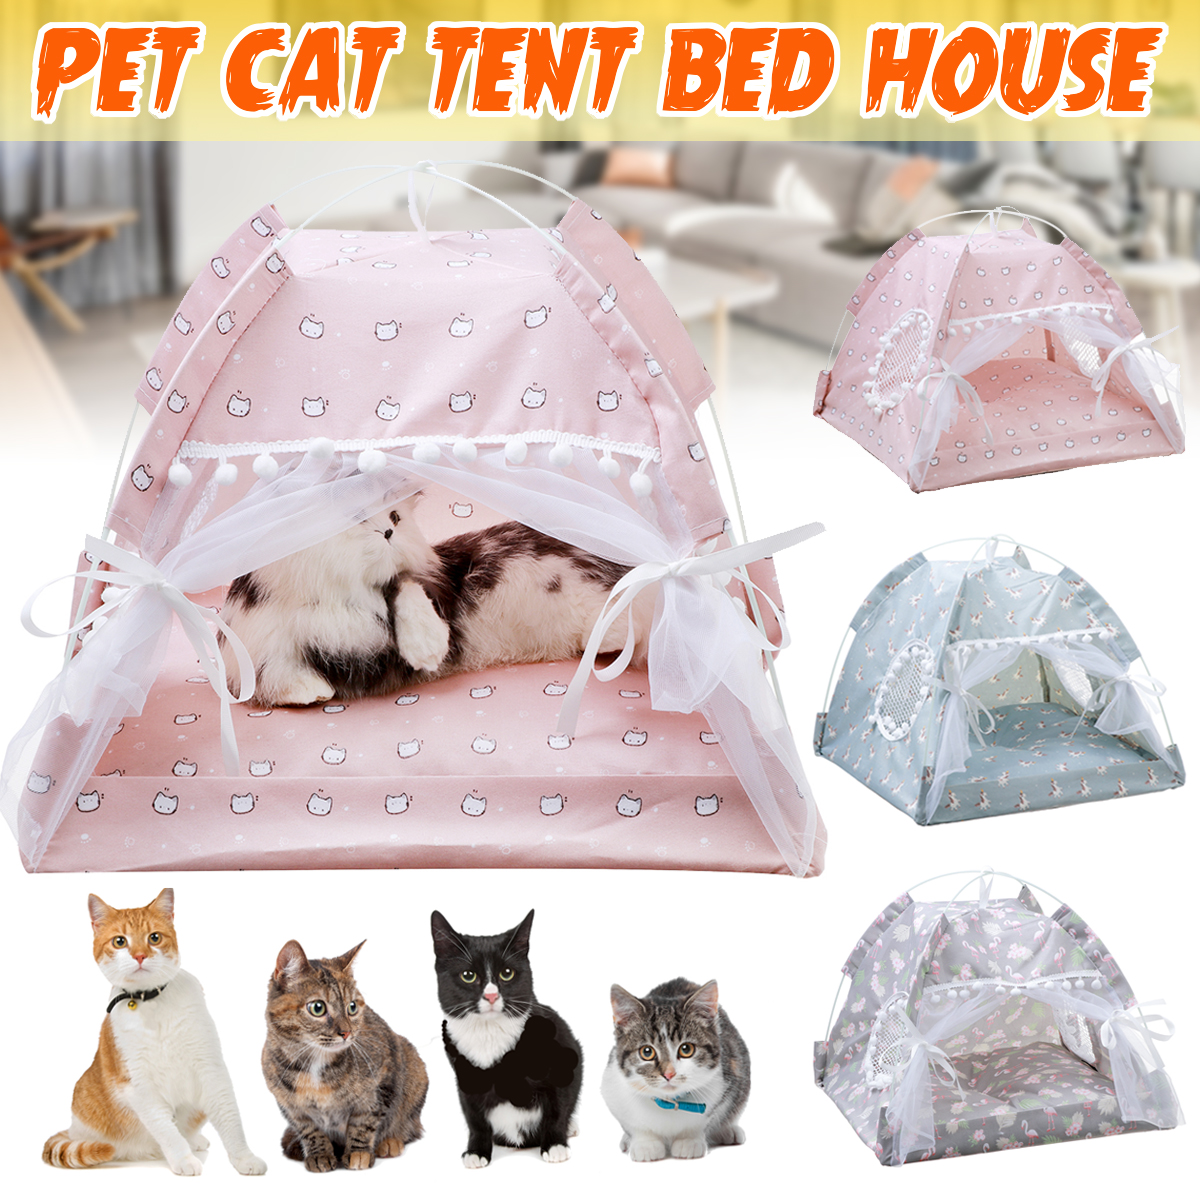 Pet-Tent-Cat-Bed-Puppy-House-Cushion-Pad-Bed-Flamingo-Pattern-Indo-1825833-1